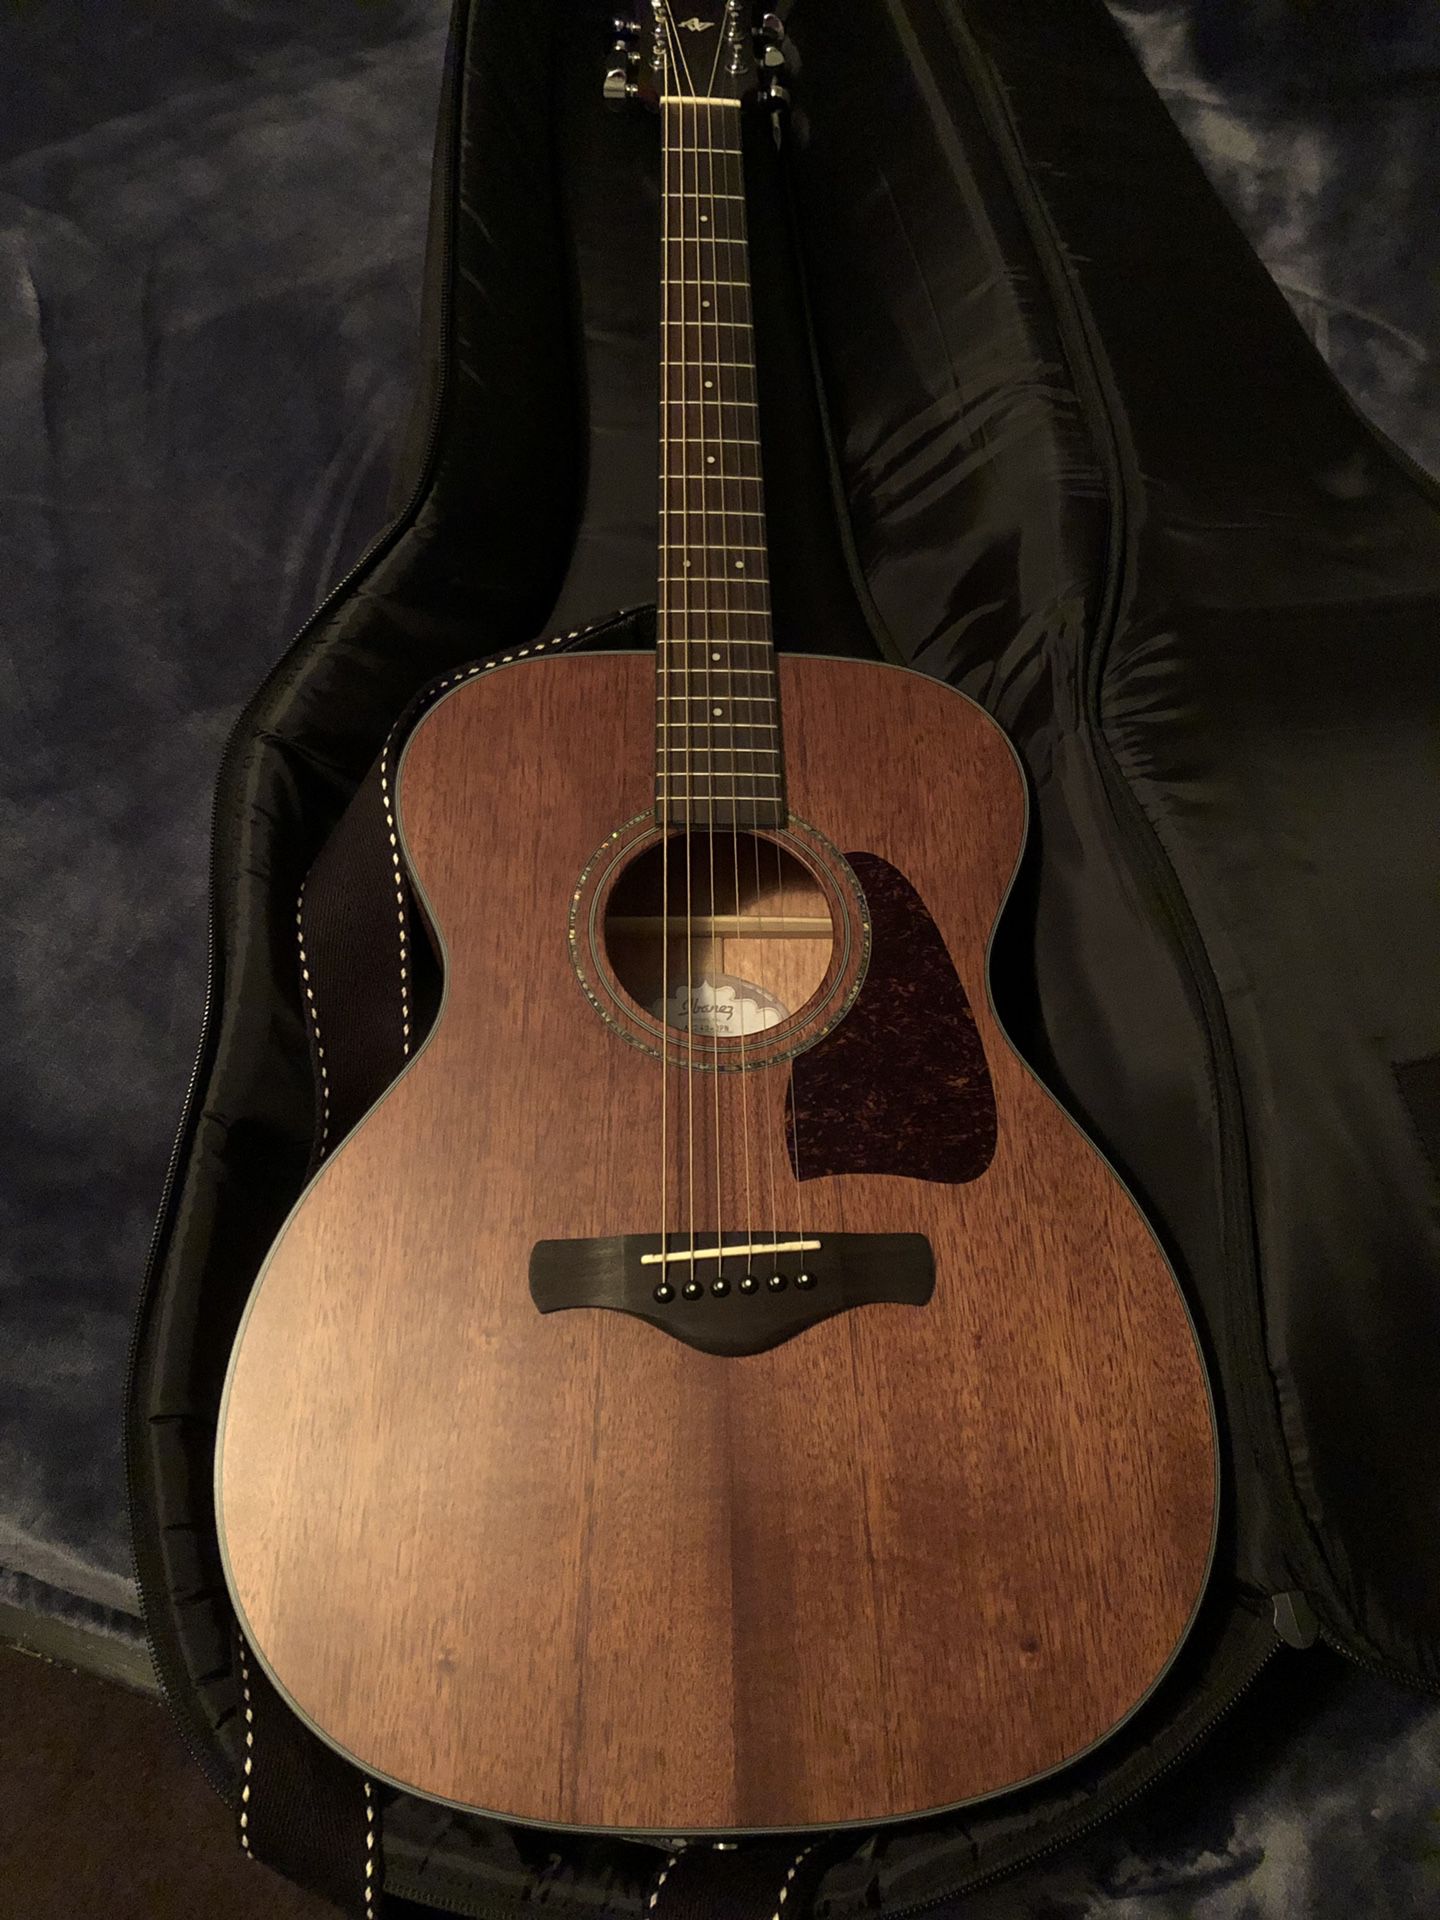 New Ibanez Acoustic Guitar